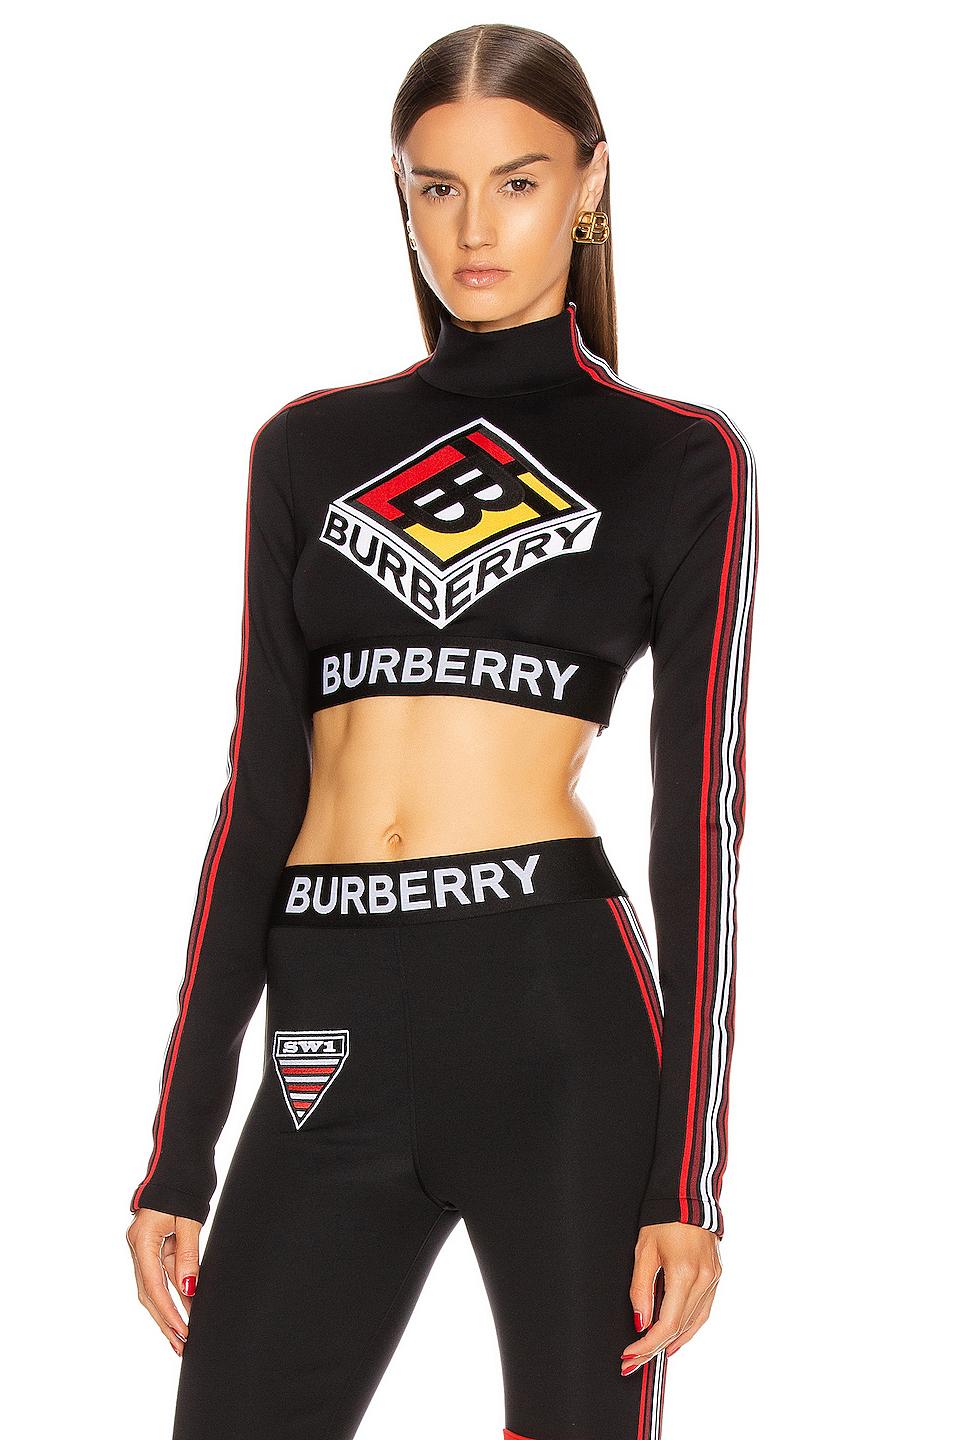 Burberry Synthetic Soca Athletic Crop Top in Black - Lyst